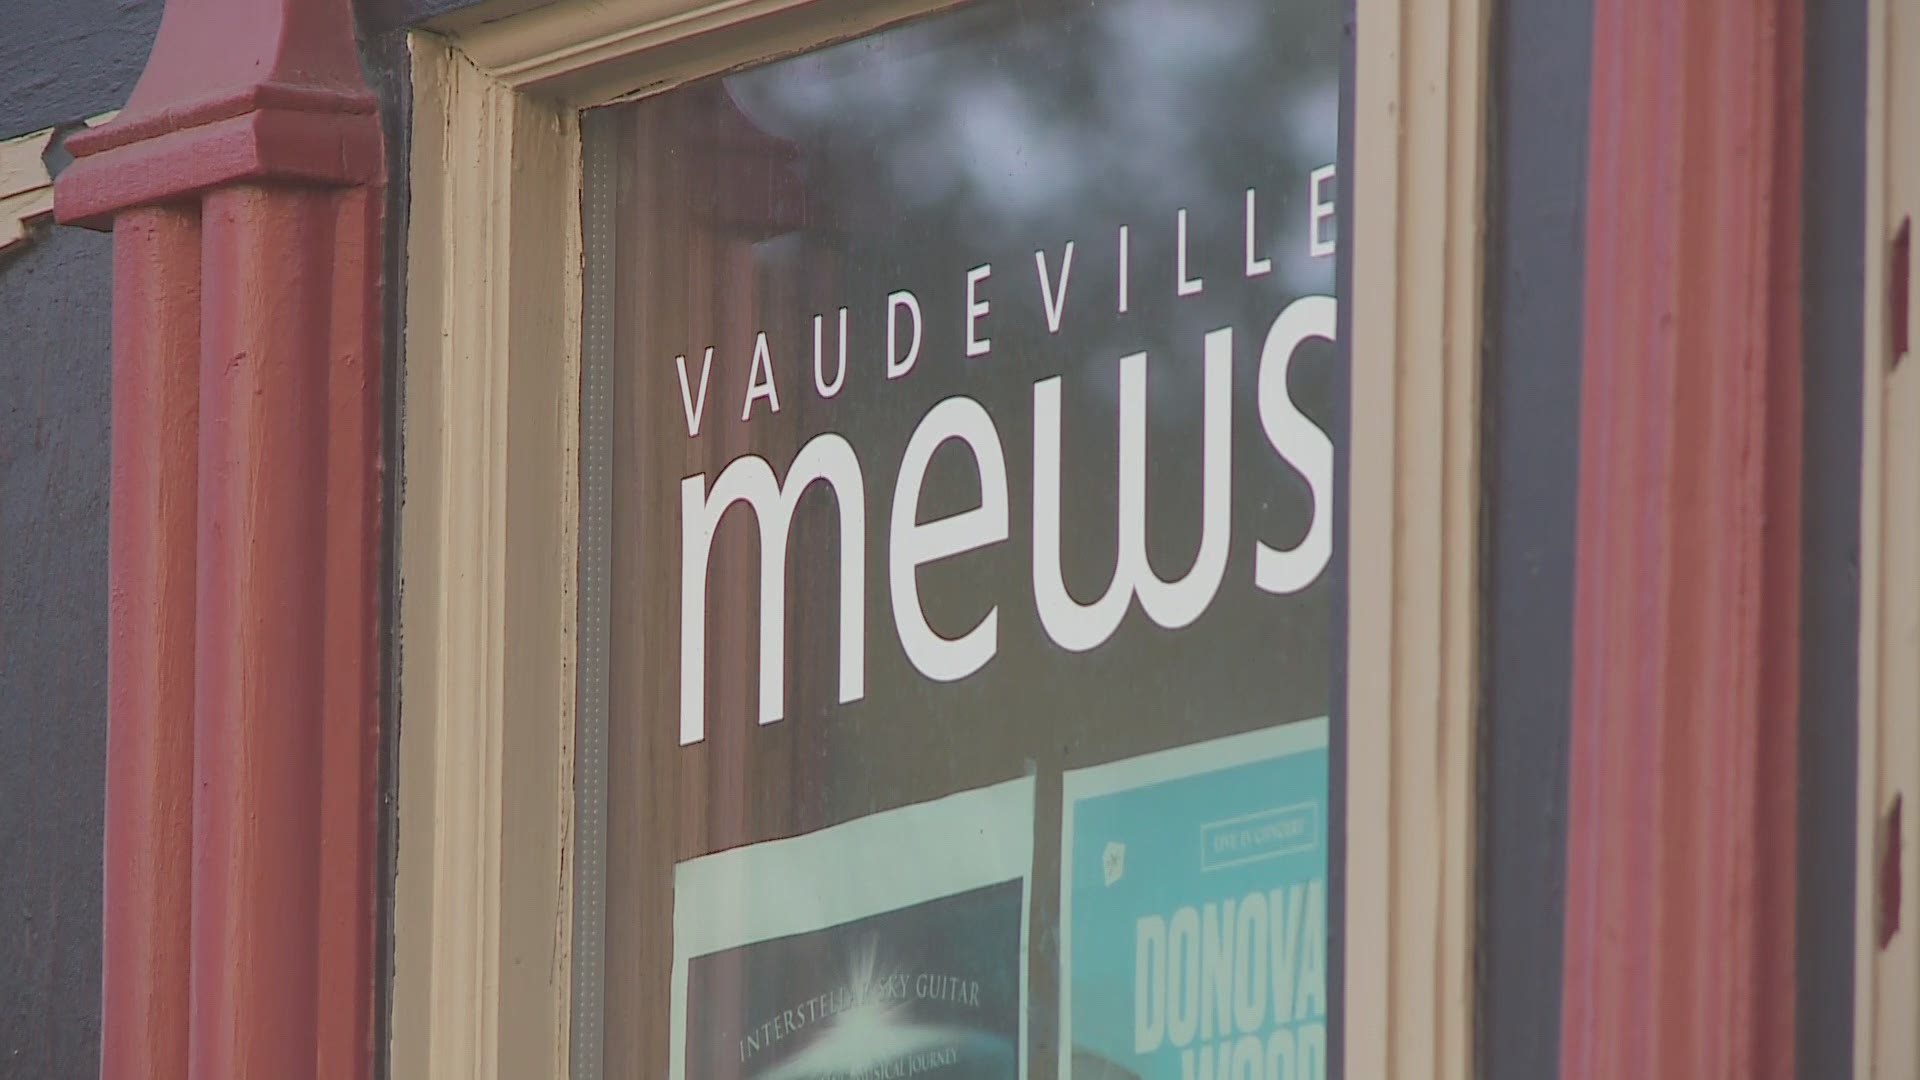 Because of the coronavirus pandemic, Vaudeville Mews is closing after nearly 18 years of operation.